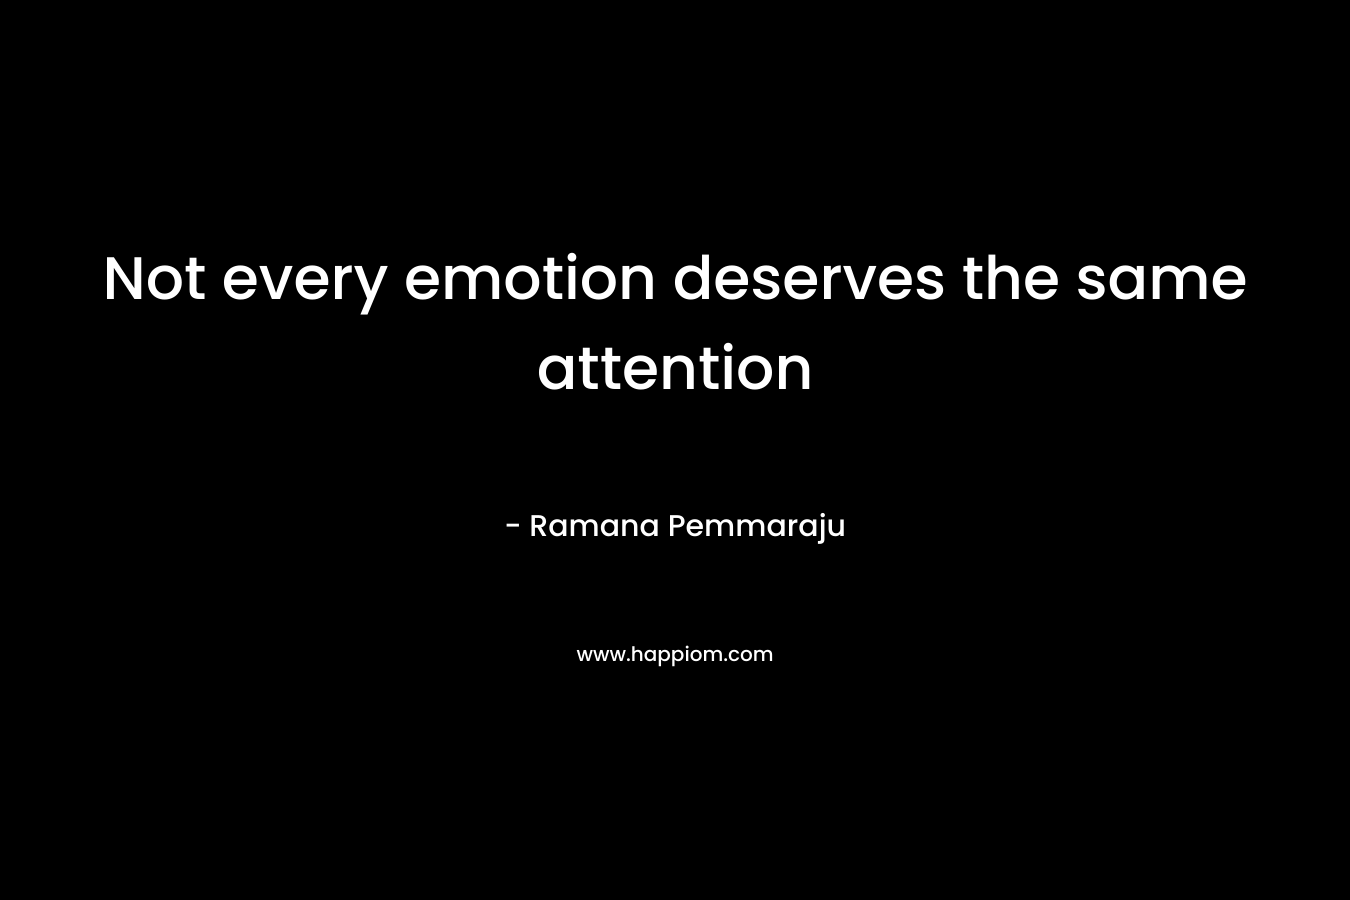 Not every emotion deserves the same attention